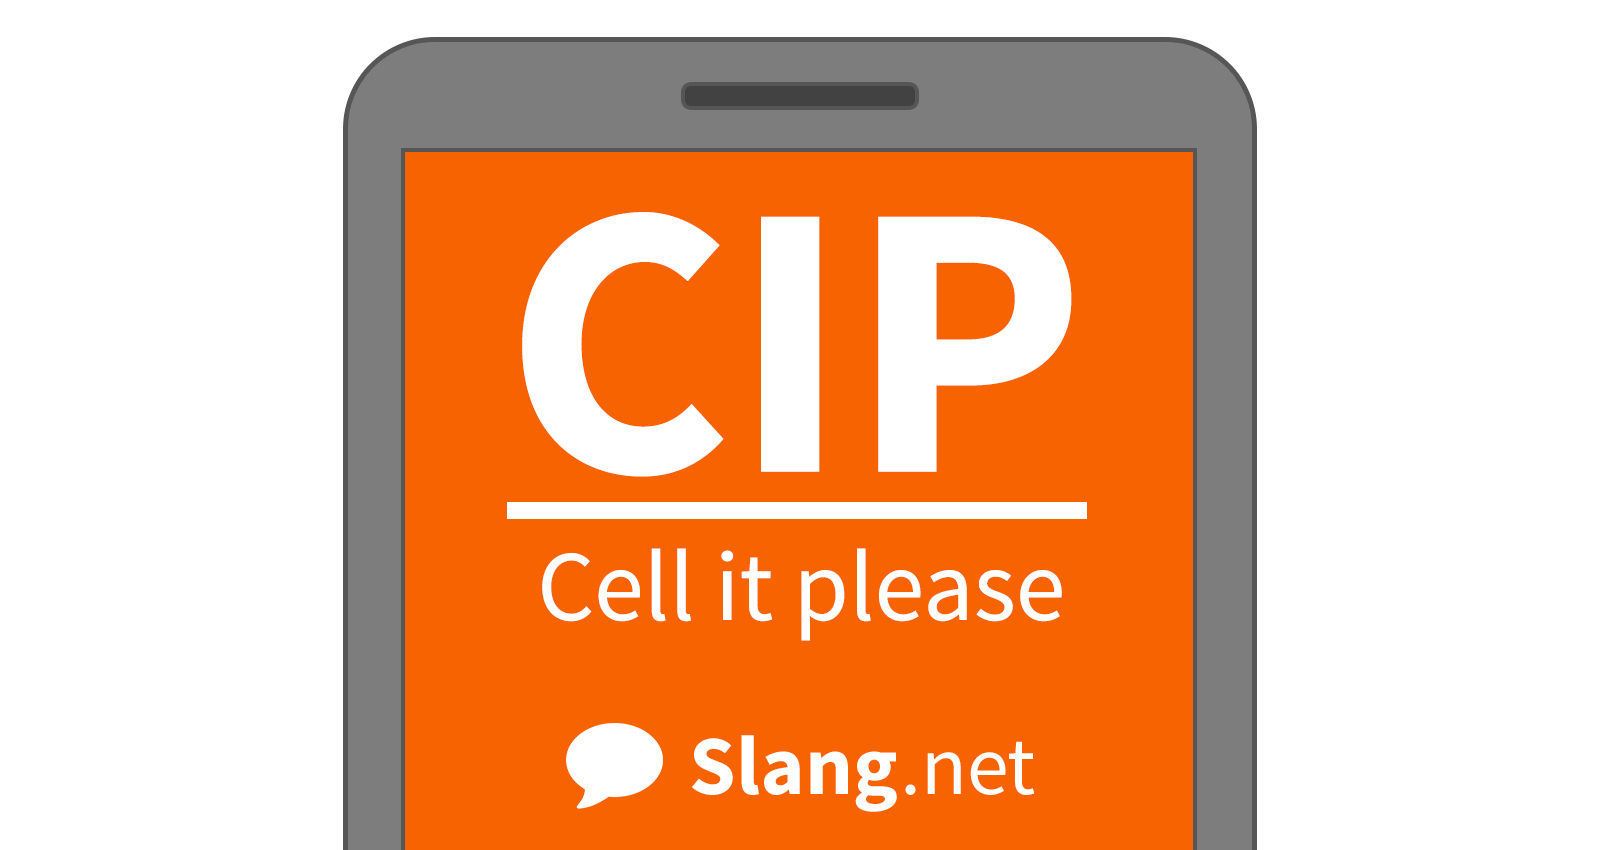 While CIP is uncommon, you may still see it in messages